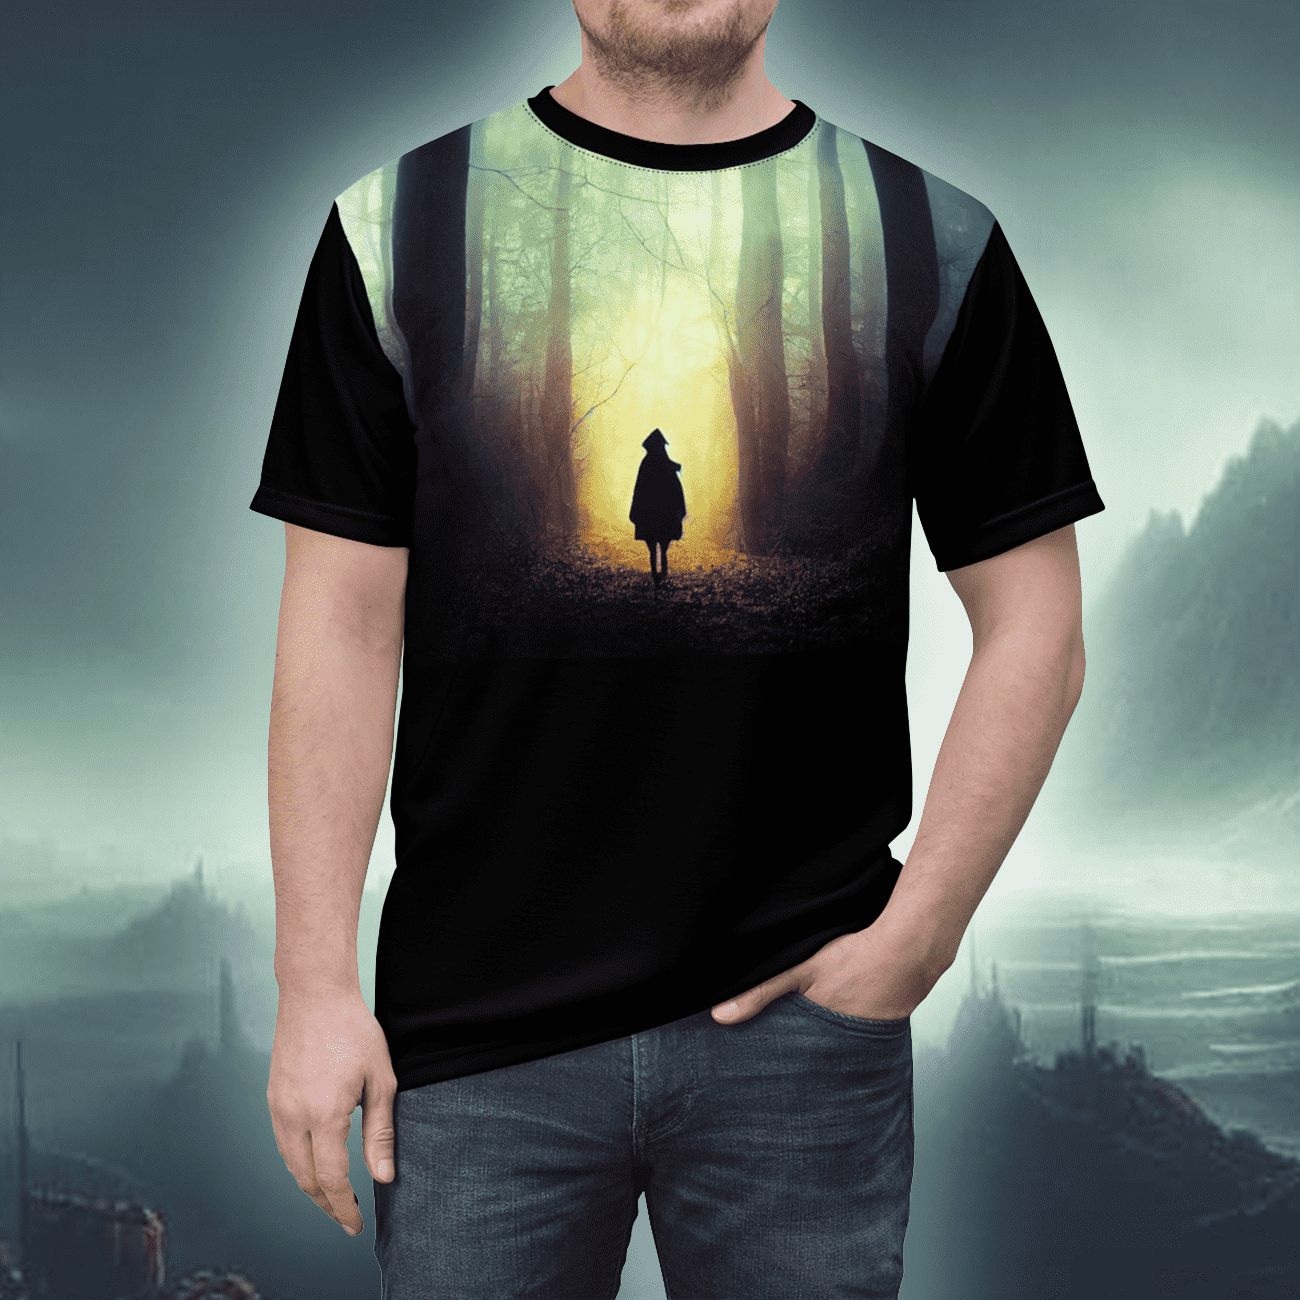 Gothic horror art t-shirt of a spooky, mysterious girl  lost in a forest. Inspired by fairy tales. 